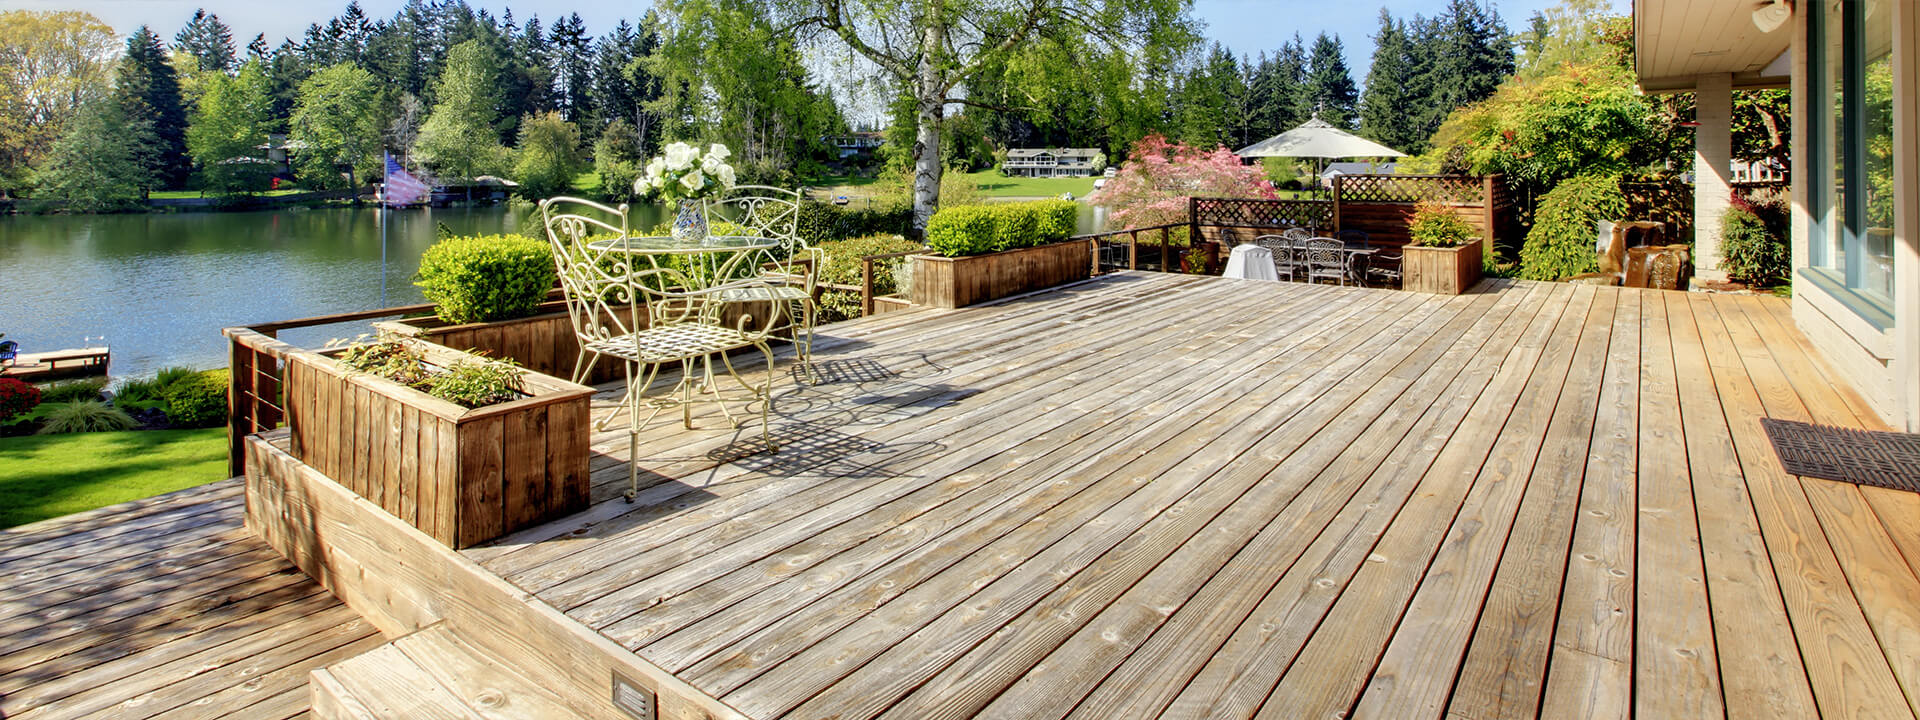 Stock photo of a tired timber decking area overlooking a lake